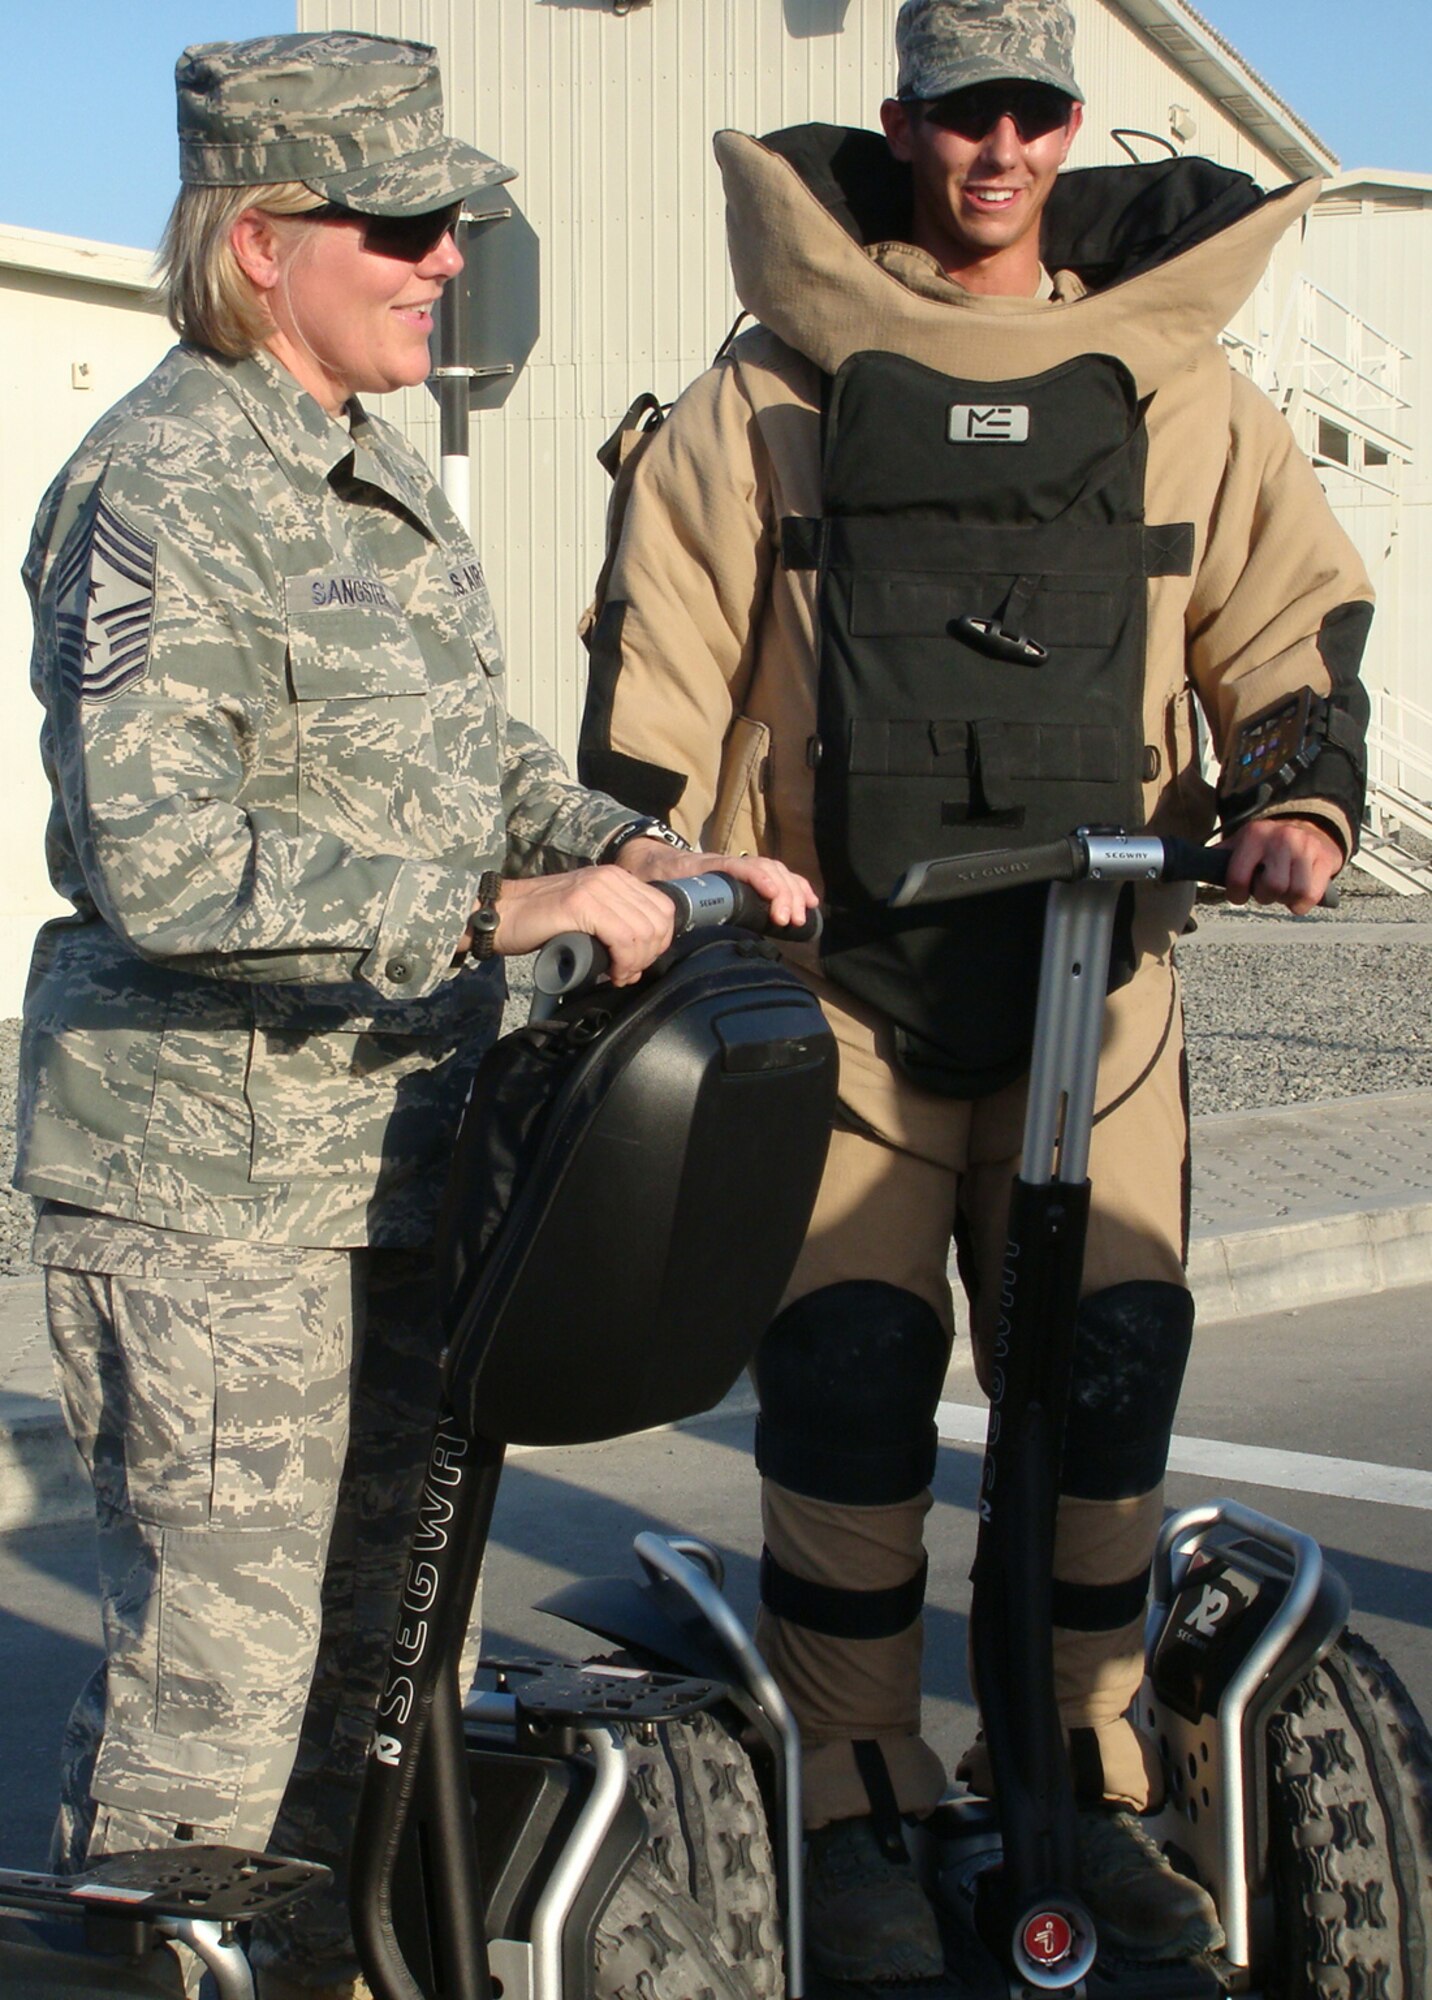 Chief Master Sgt. Suzan K. Sangster (left), command chief master sergeant for the 380th Air Expeditionary Wing, learns about the types of equipment used by 380th Expeditionary Civil Engineer Squadron explosive ordnance disposal Airmen during an event Nov. 26, 2009, at a non-disclosed base in Southwest Asia.  Chief Sangster is a 27-year veteran of the Air Force and is the Air Force's only female command chief for an AEW in the U.S. Central Command area of responsibility.  (U.S. Air Force Photo/Released) 